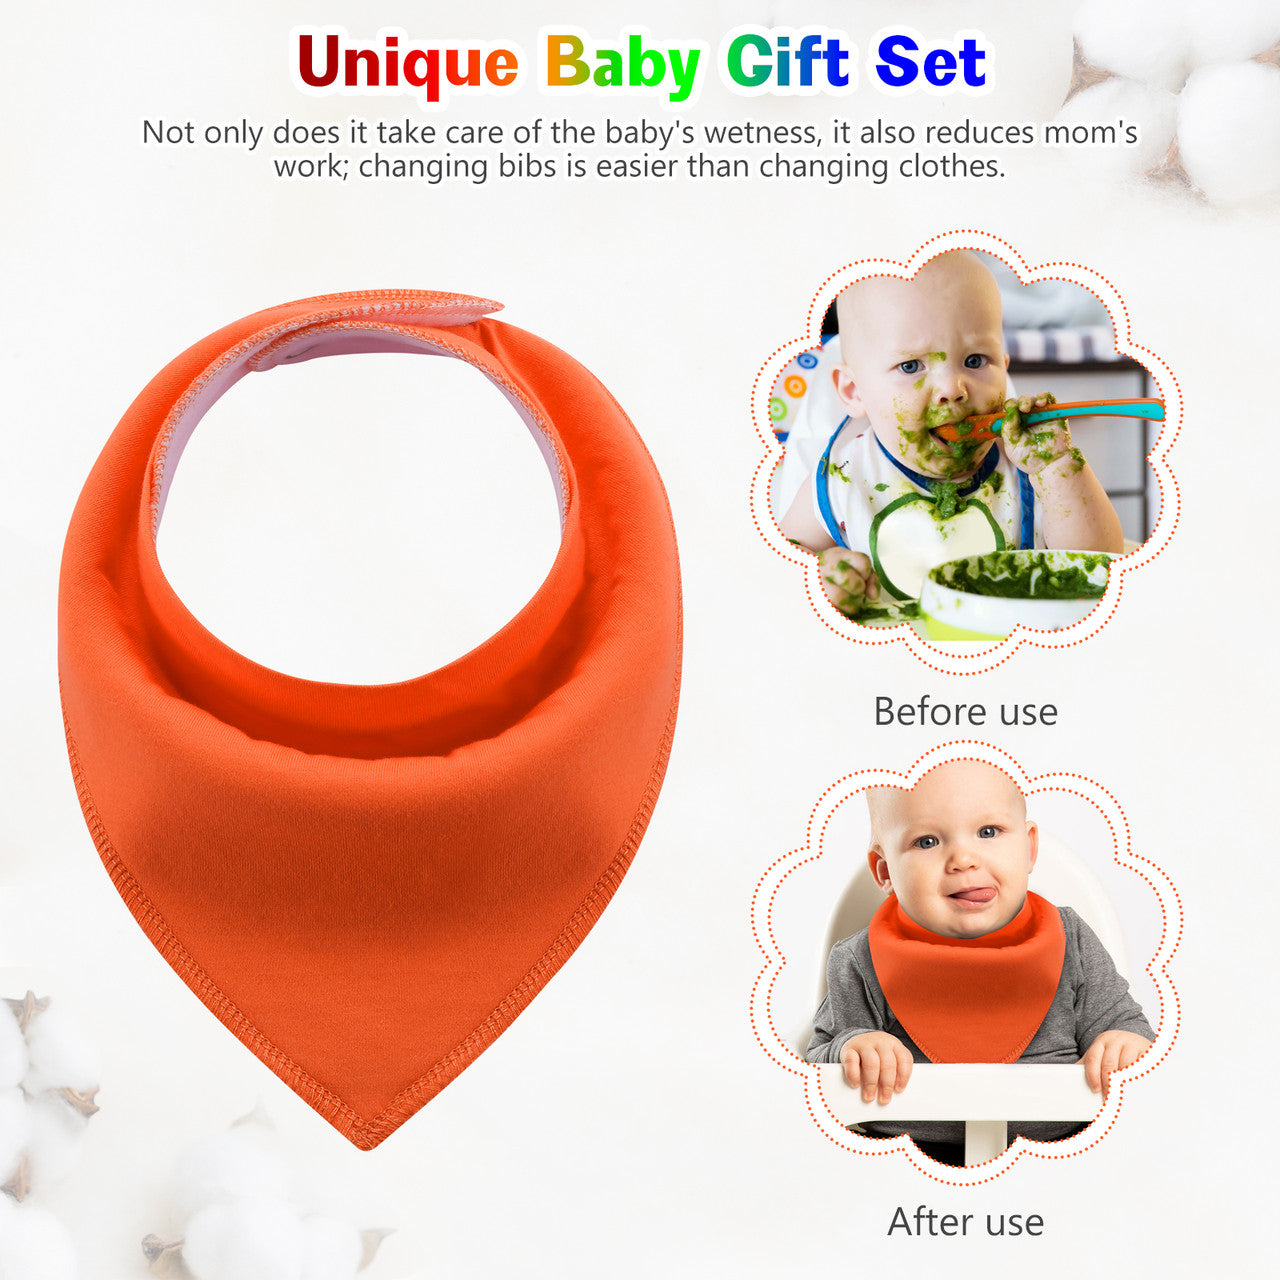 Soft and Absorbent Baby Bibs, Durable and Long-Lating that is also Machine Washable, 8 Pack